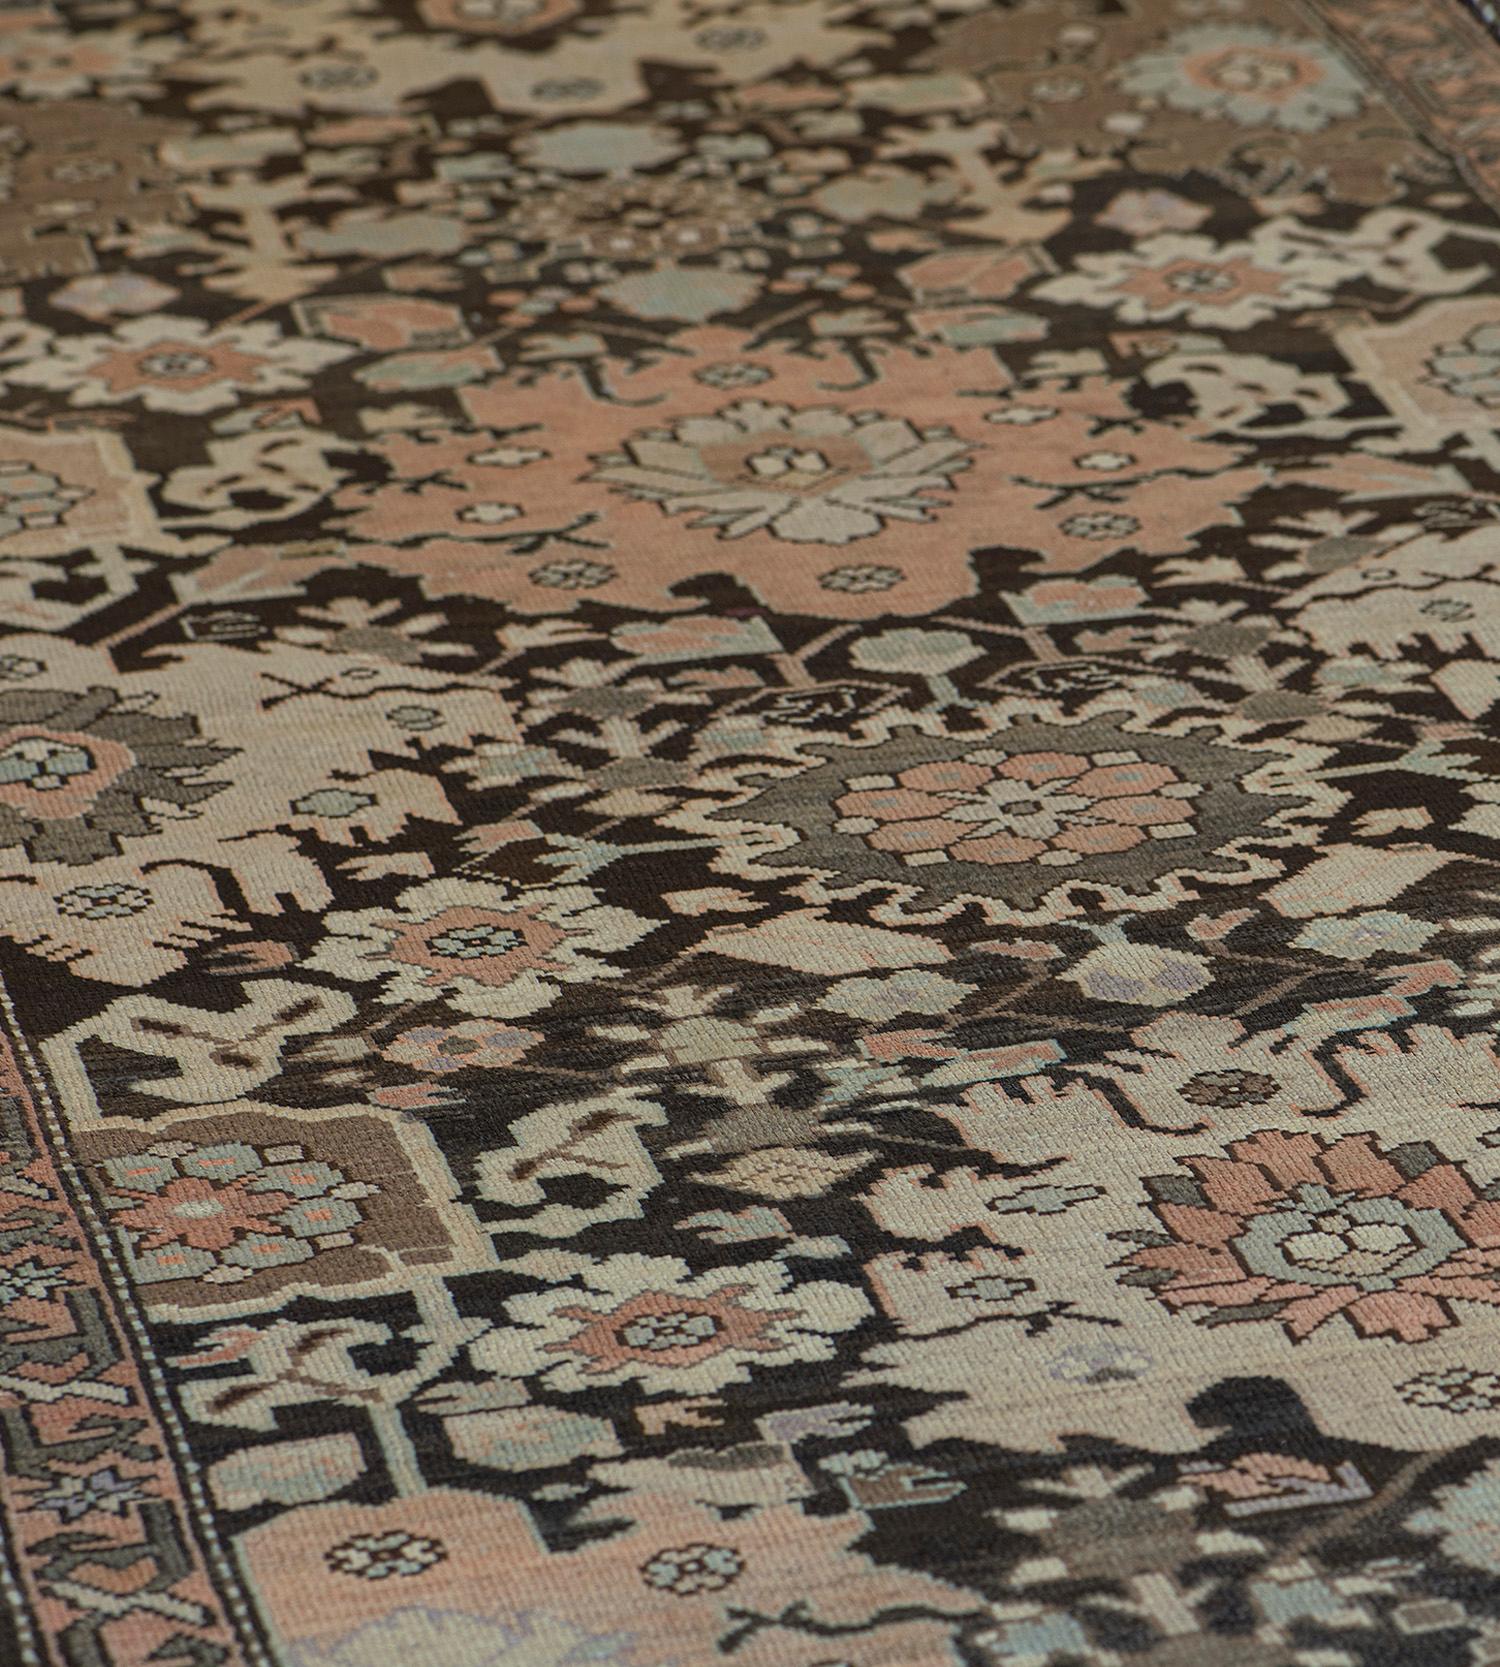 This traditional handwoven Persian Karabagh rug has a deep umber field with broad sweeping palmettes issuing angled floral geometric vine lattice, in a dusty peach angled floral vine border.

This Runner matches Item Ref: LU1518219945182